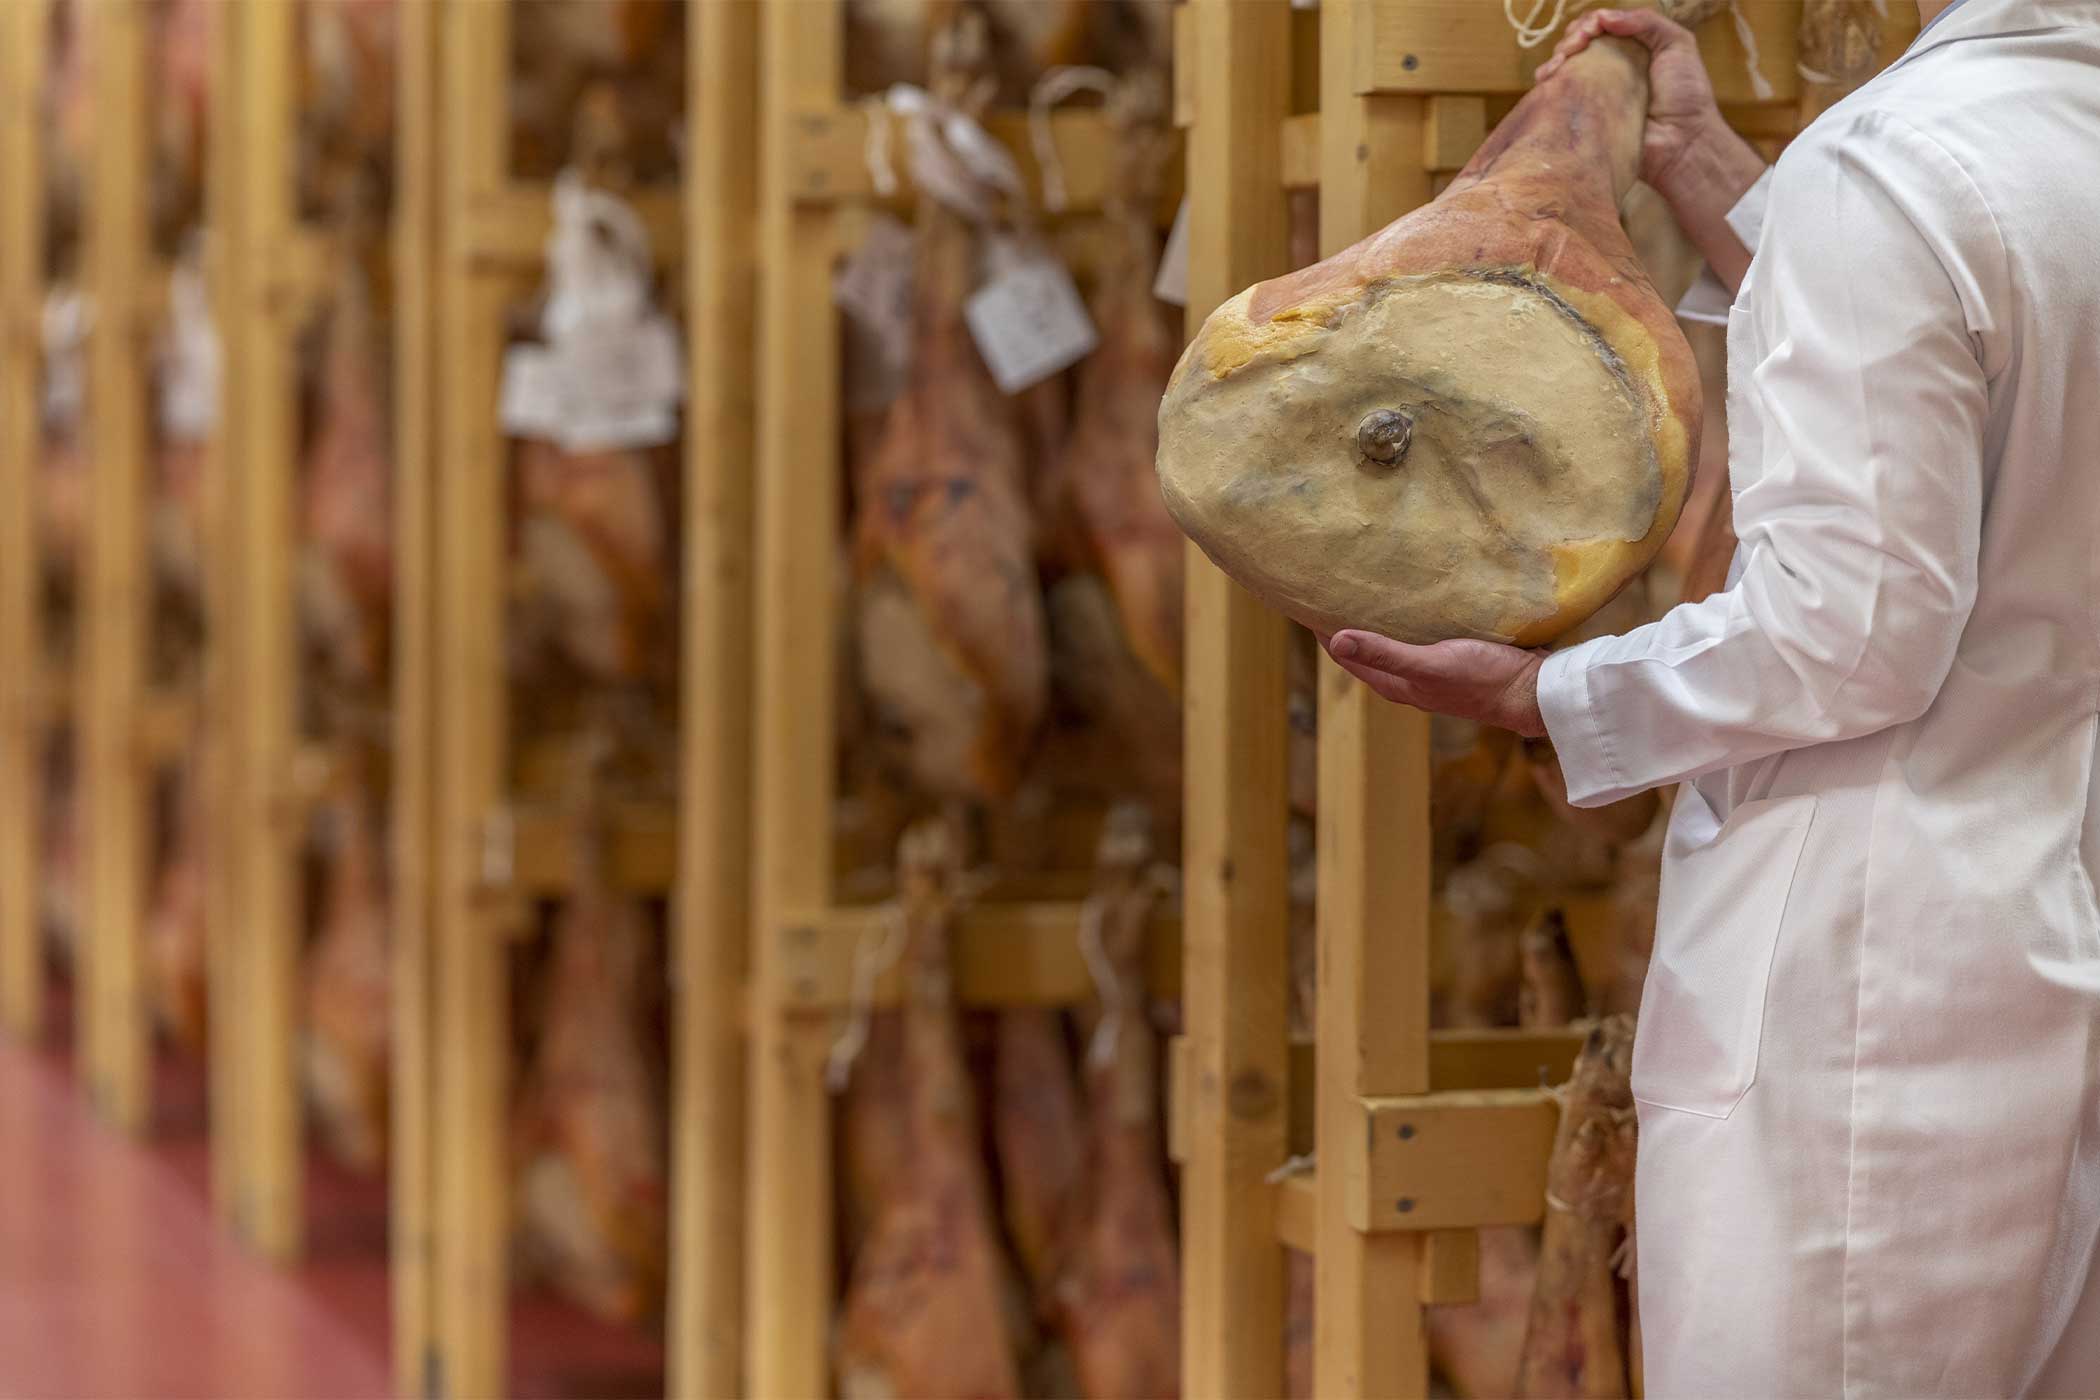 The traceability of the supply chain and the quality of Prosciutto di San Daniele